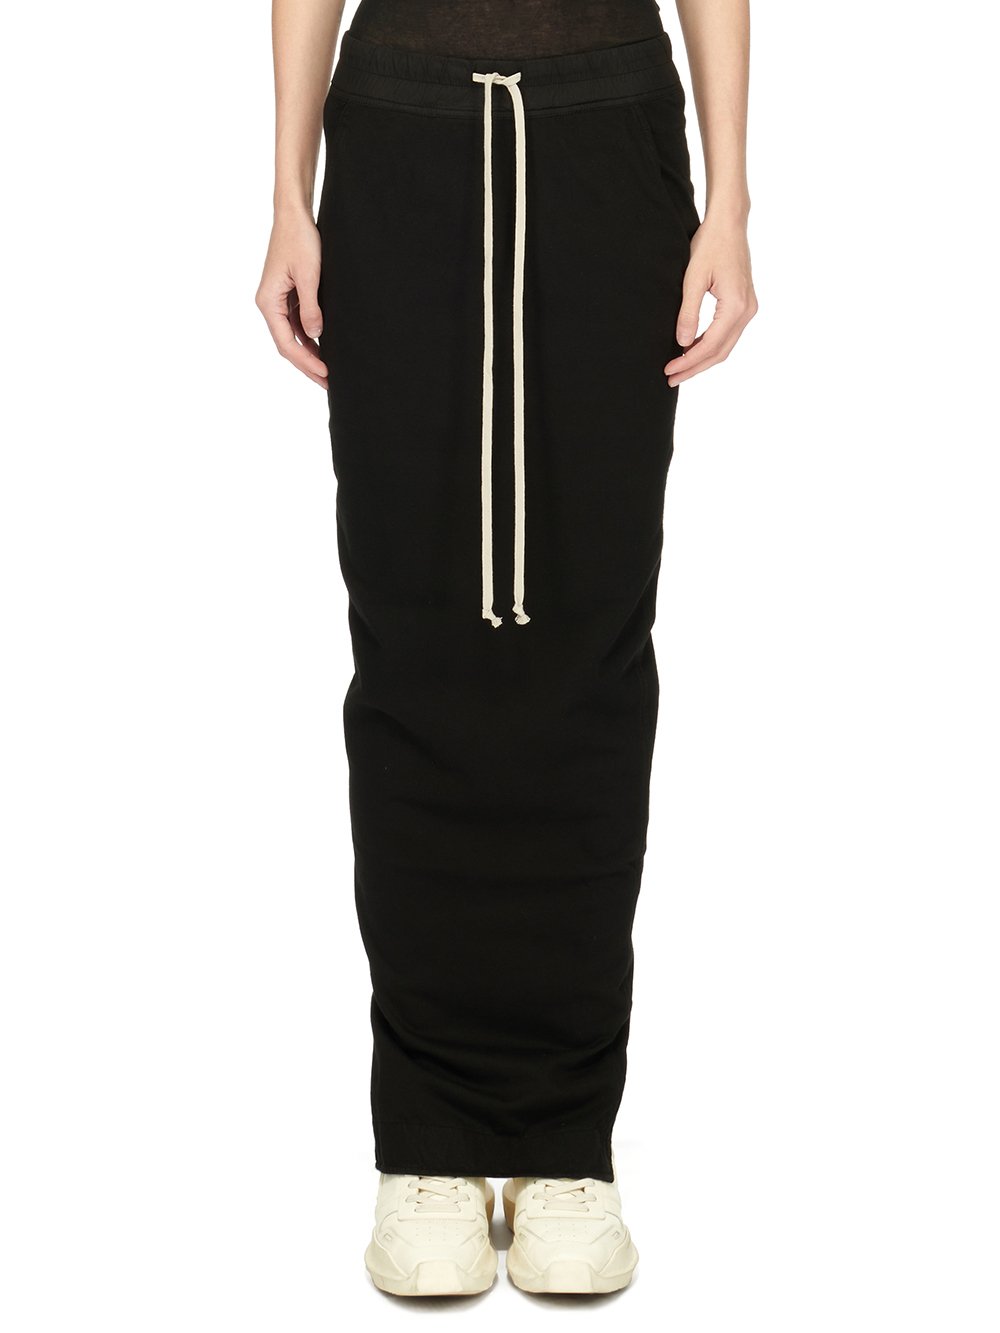 DRKSHDW FW23 LUXOR PULL ON PILLAR SKIRT IN BLACK COMPACT HEAVY COTTON JERSEY